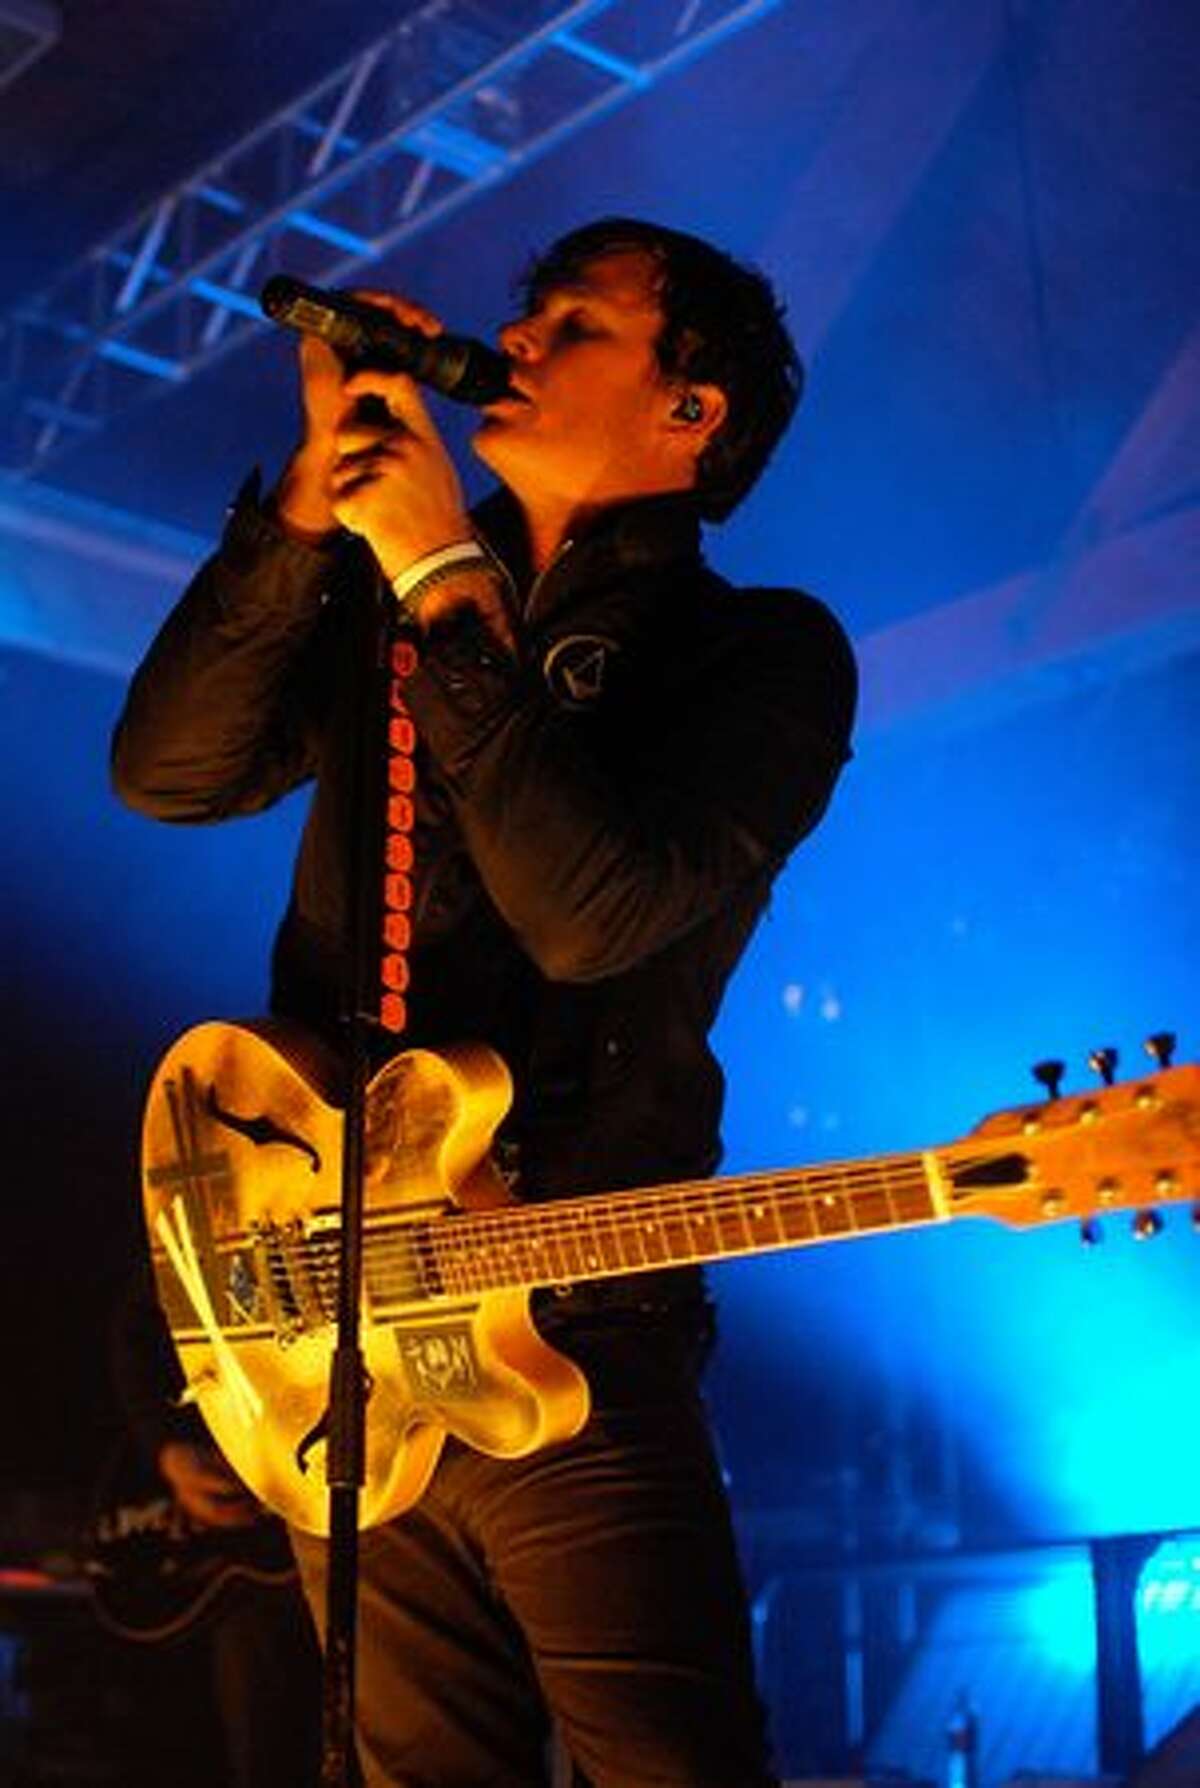 Angels and Airwaves frontman Tom DeLonge, formerly of blink 182, performing at Showbox Sodo on April 7, 2010.